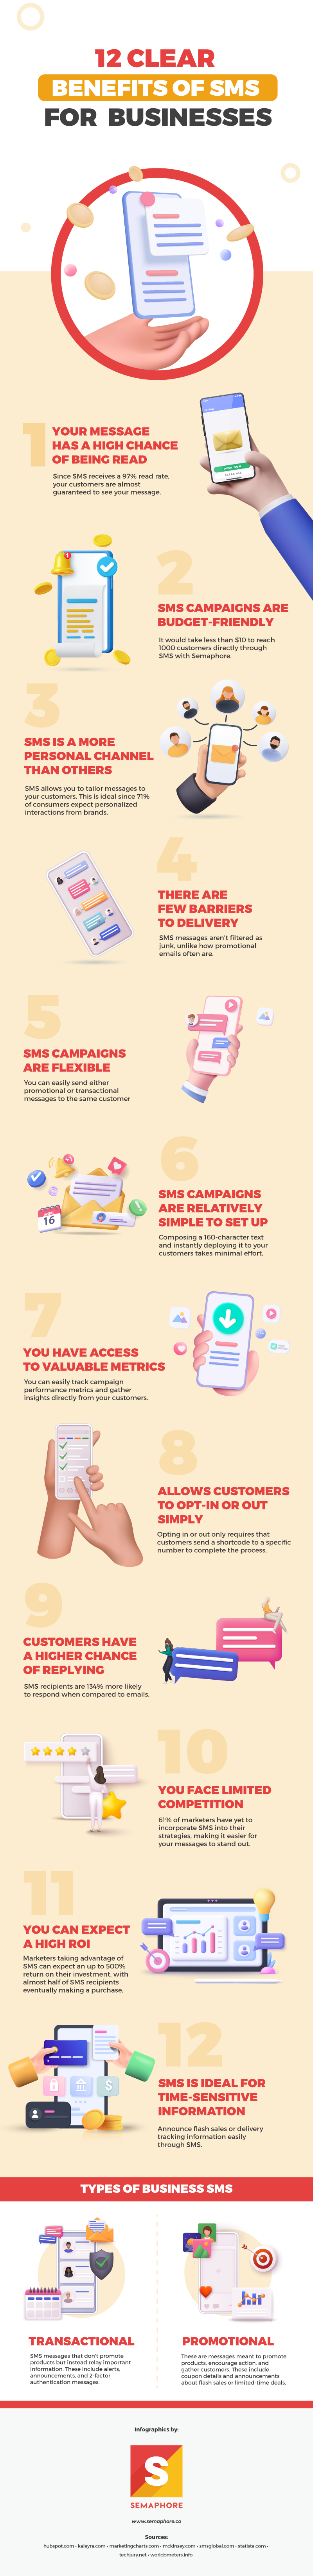 12 Clear Benefits of SMS for Businesses - Infographic